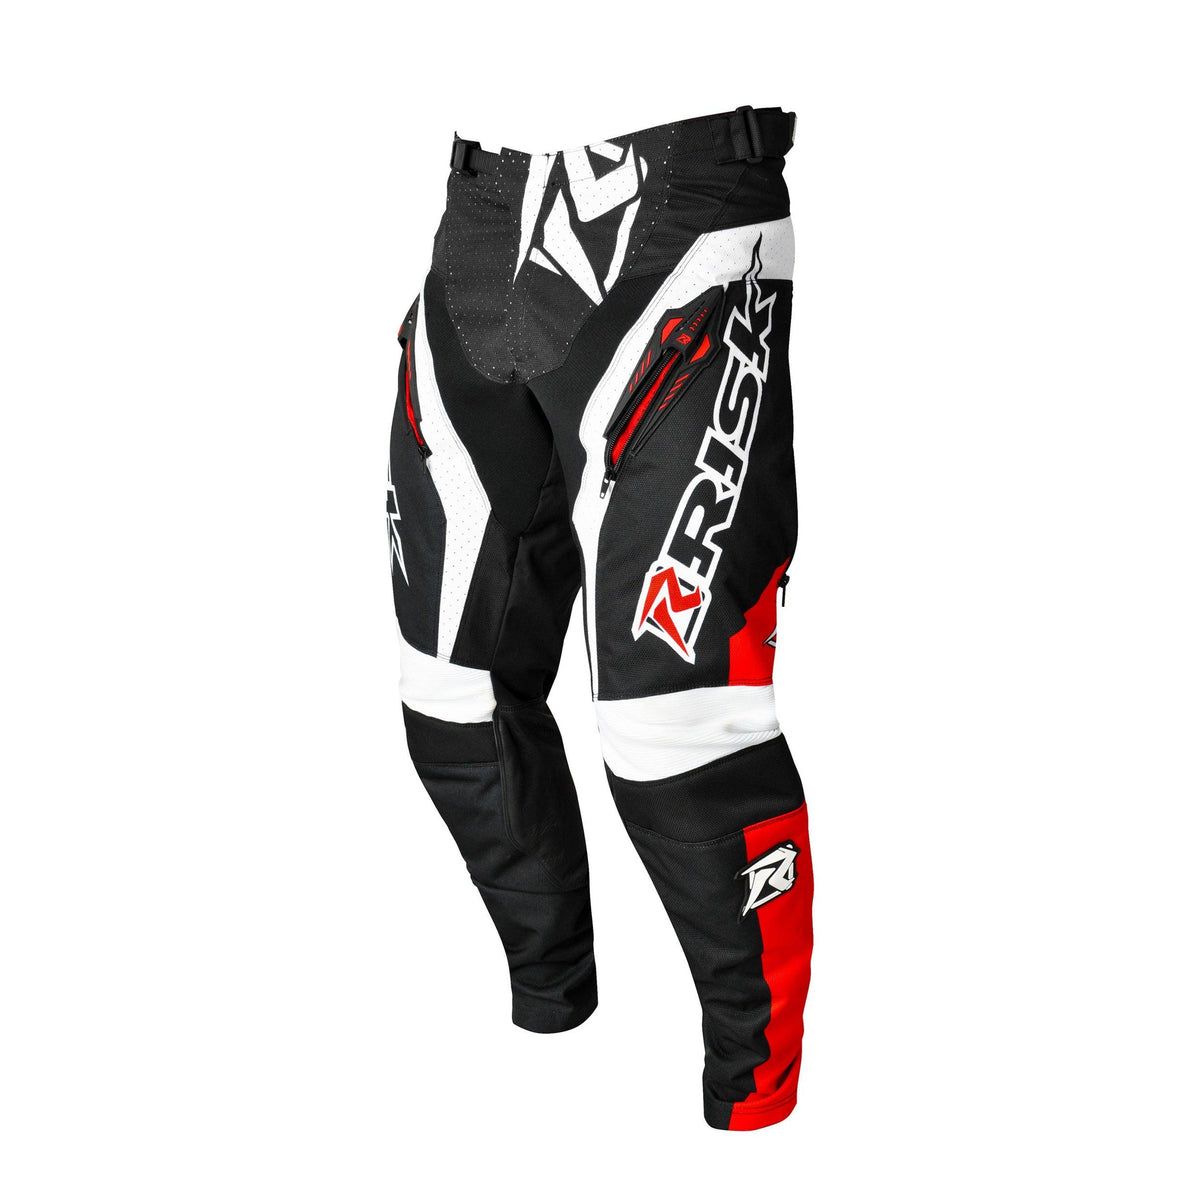 Blue Boys Youth Extreme Series MX Pants (2021) | Pure Adrenaline Motorsports